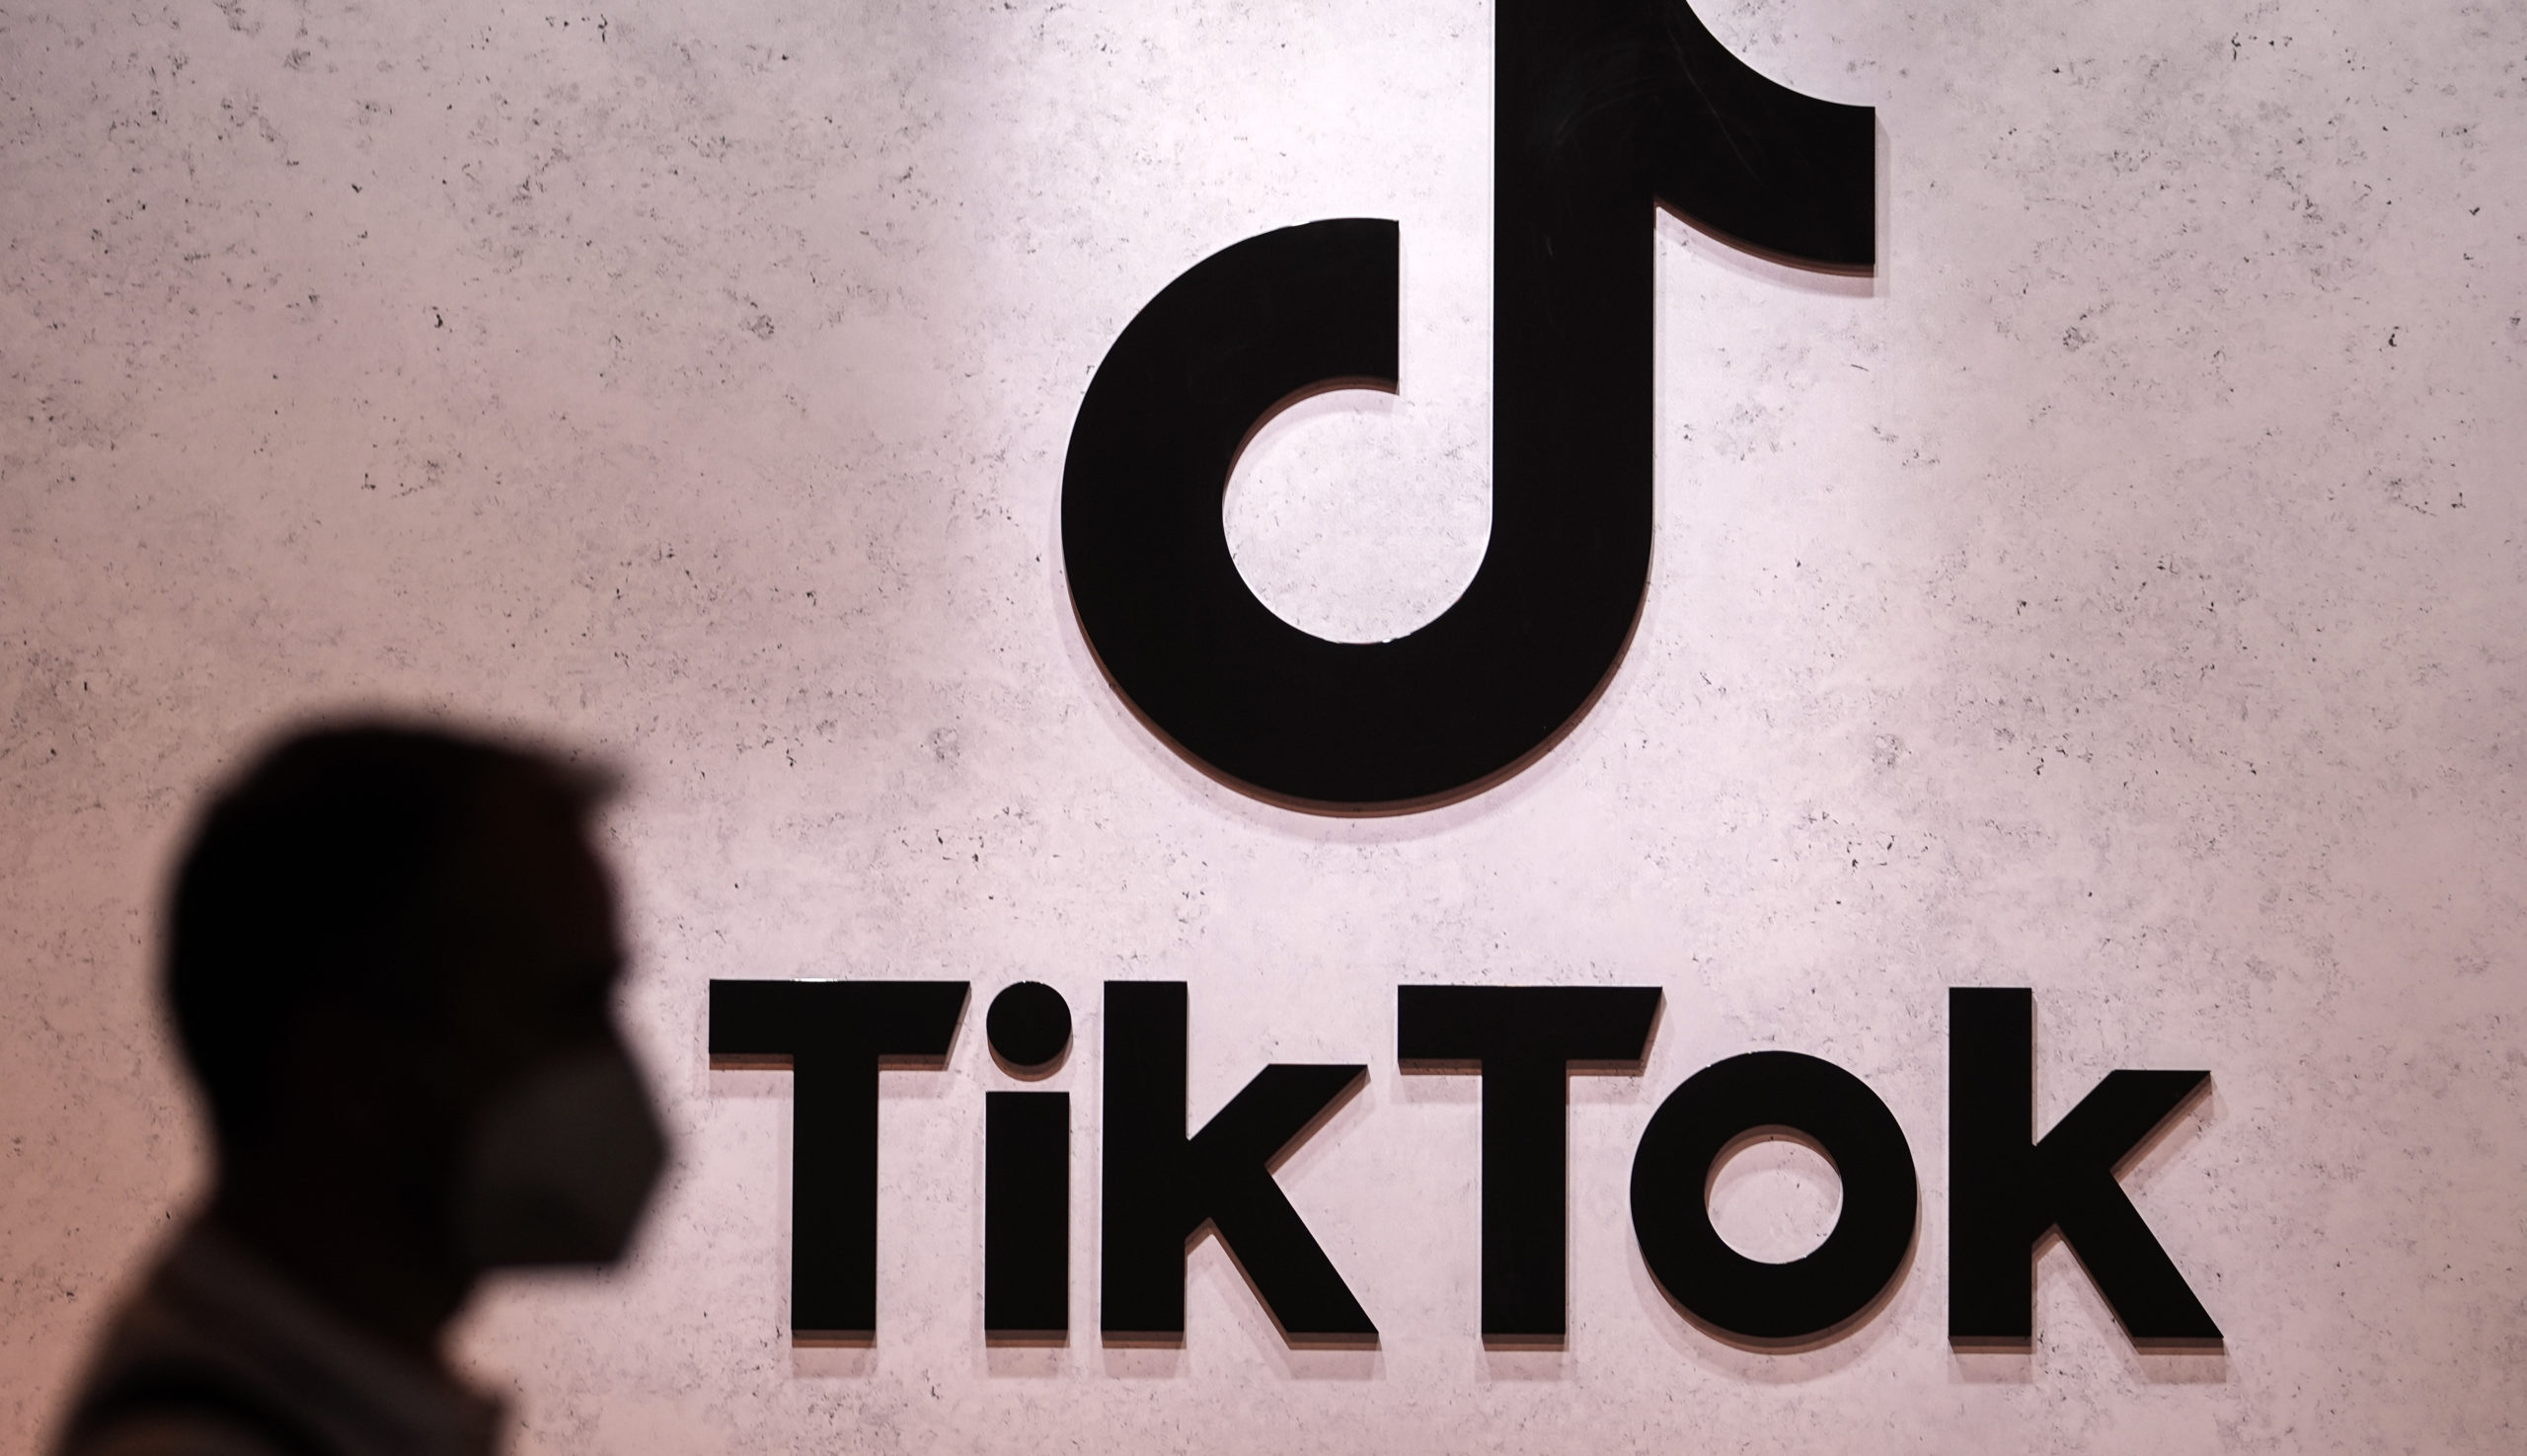 TikTok’s response to the ‘huge’ fine: We respectfully disagree with the decision